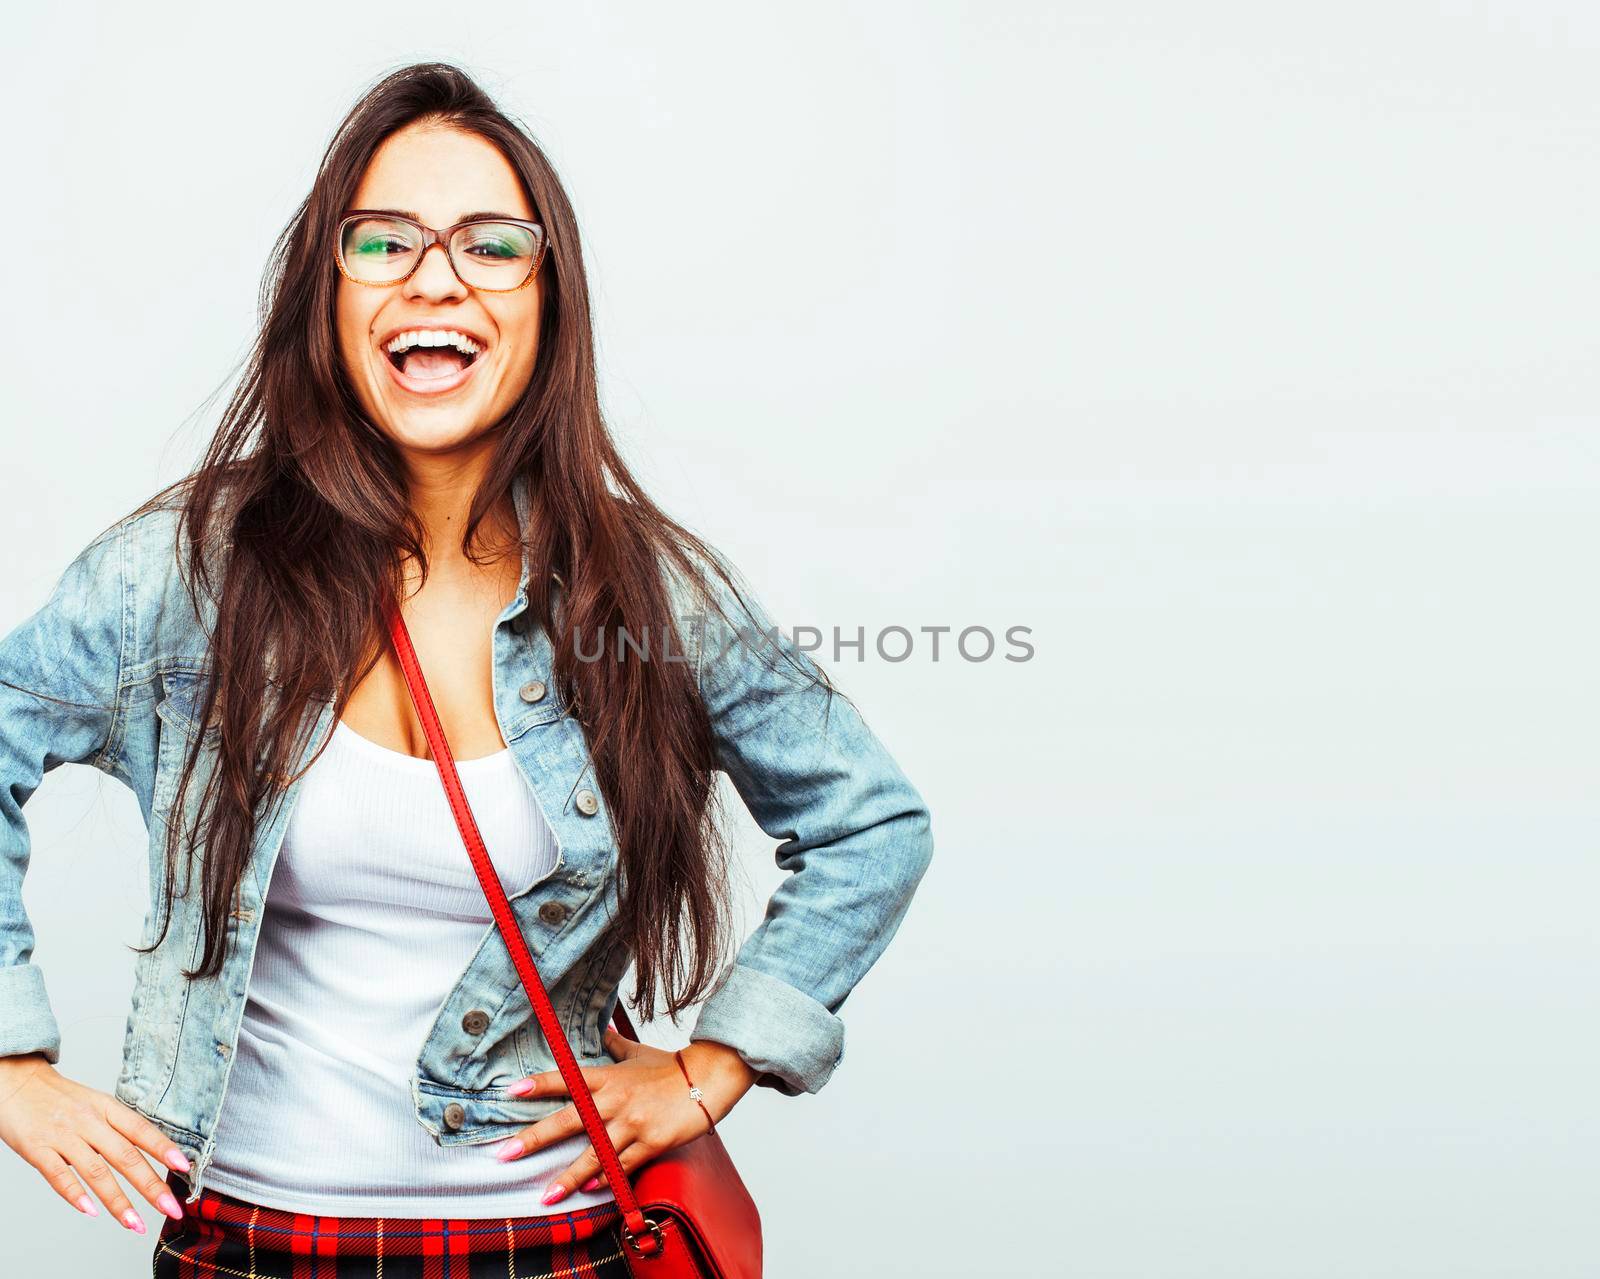 young happy smiling latin american teenage girl emotional posing isolated on white background, lifestyle people concept closeup